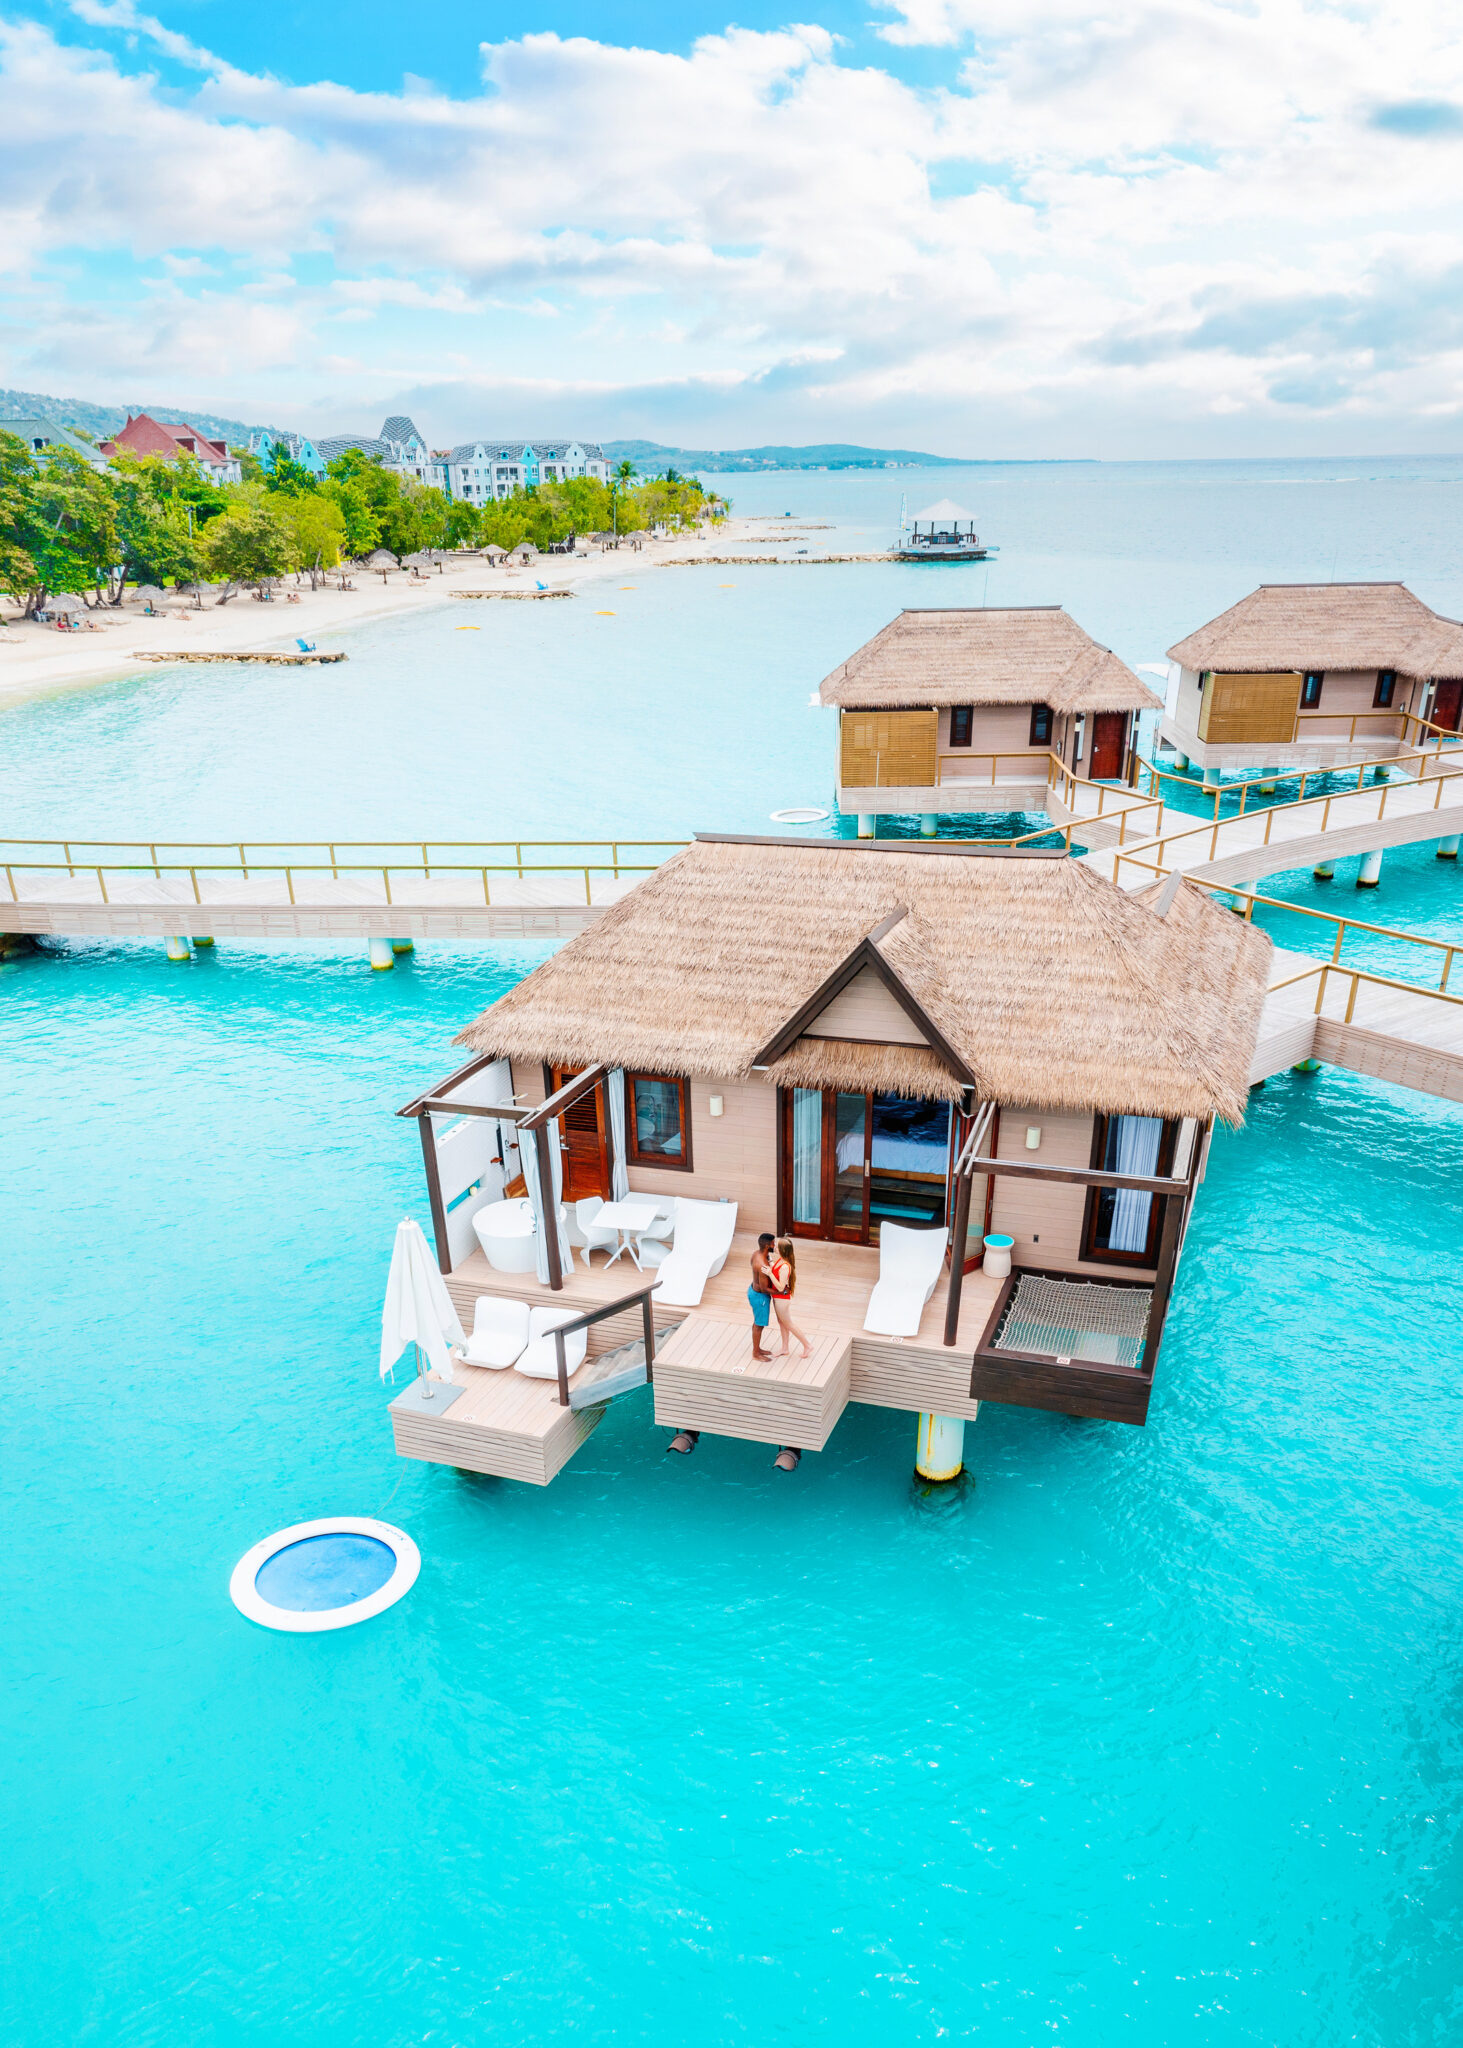 What To Expect At Sandals Overwater Bungalows In Jamaica - Follow Me Away